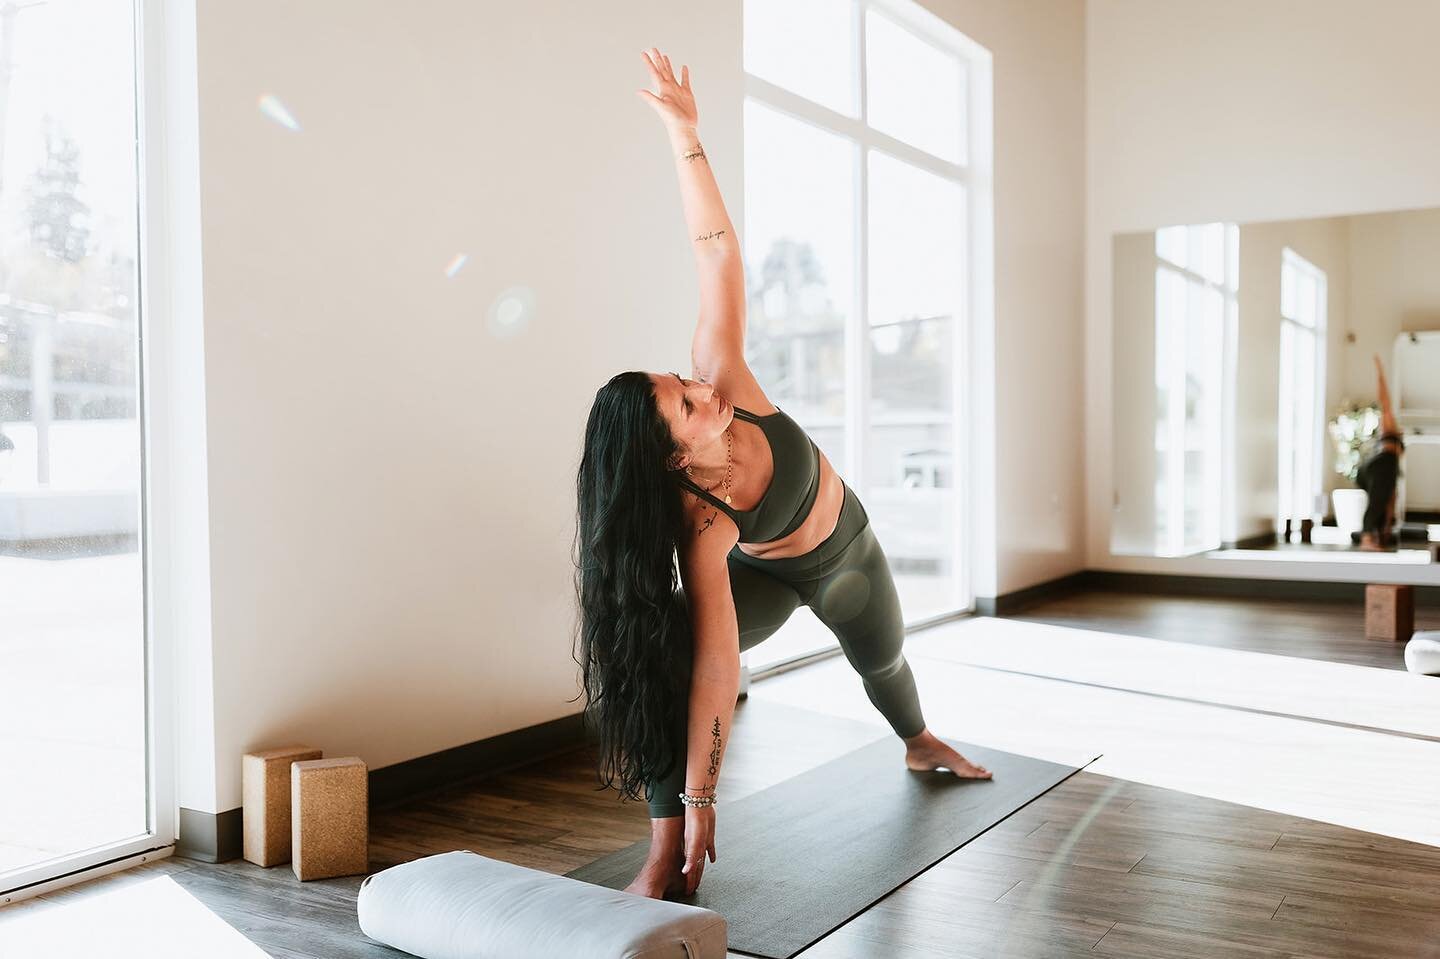 &ldquo;Yoga is a light, which once lit, will never dim. The better your practice, the brighter the flame.&rdquo; 
- B. K. S. Iyengar

Come roll out your mat, bask in the sunlight and brighten your flame with us this beautiful fall weekend.

Saturday
